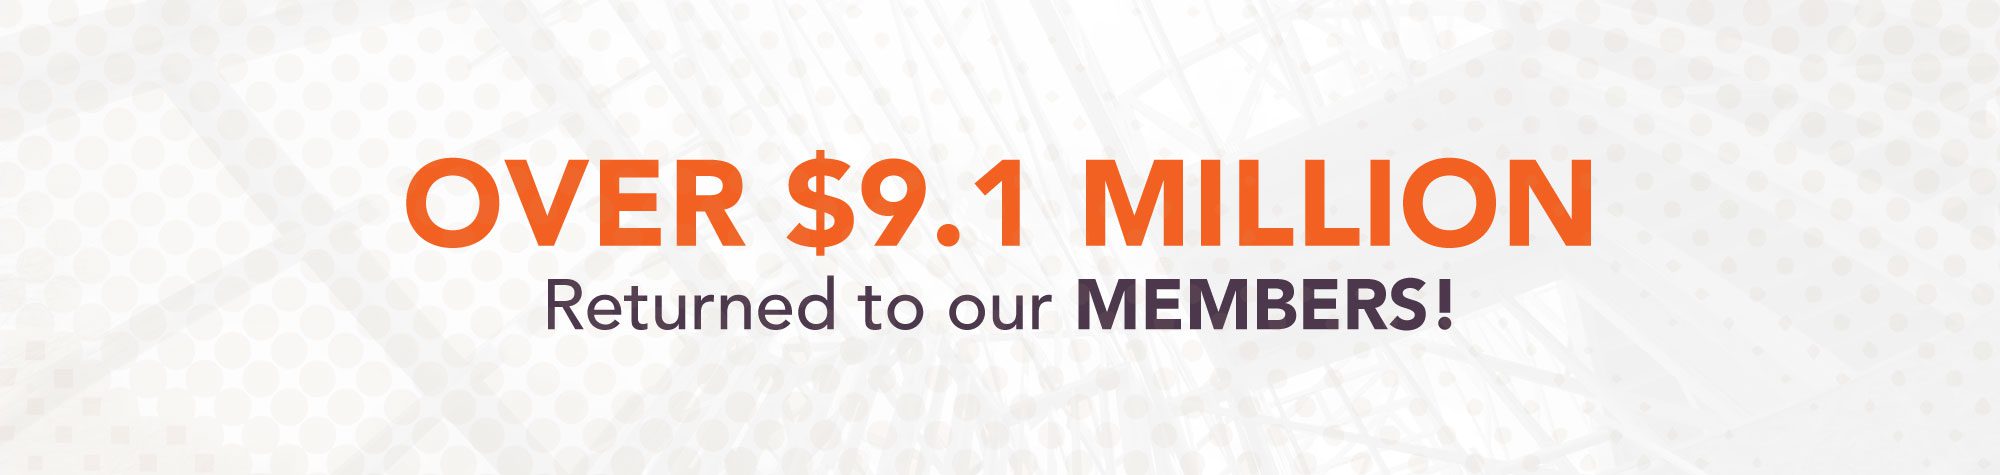 Over 9.1 MIllion Dollars returned to our members